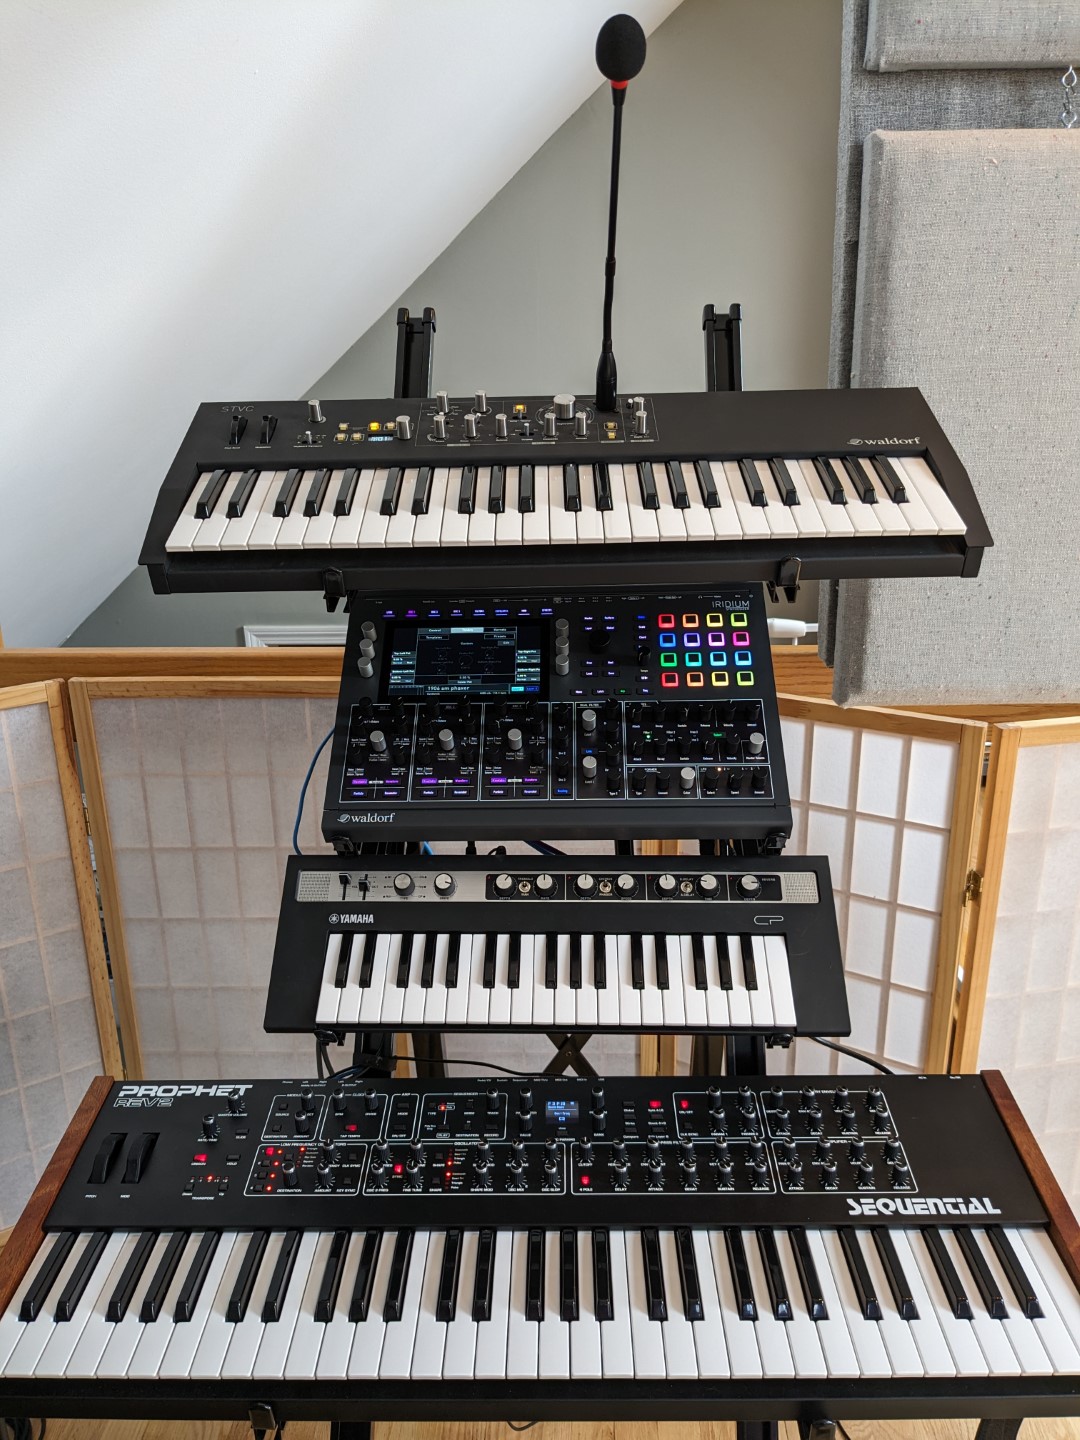 A tall stand full of synthesizers